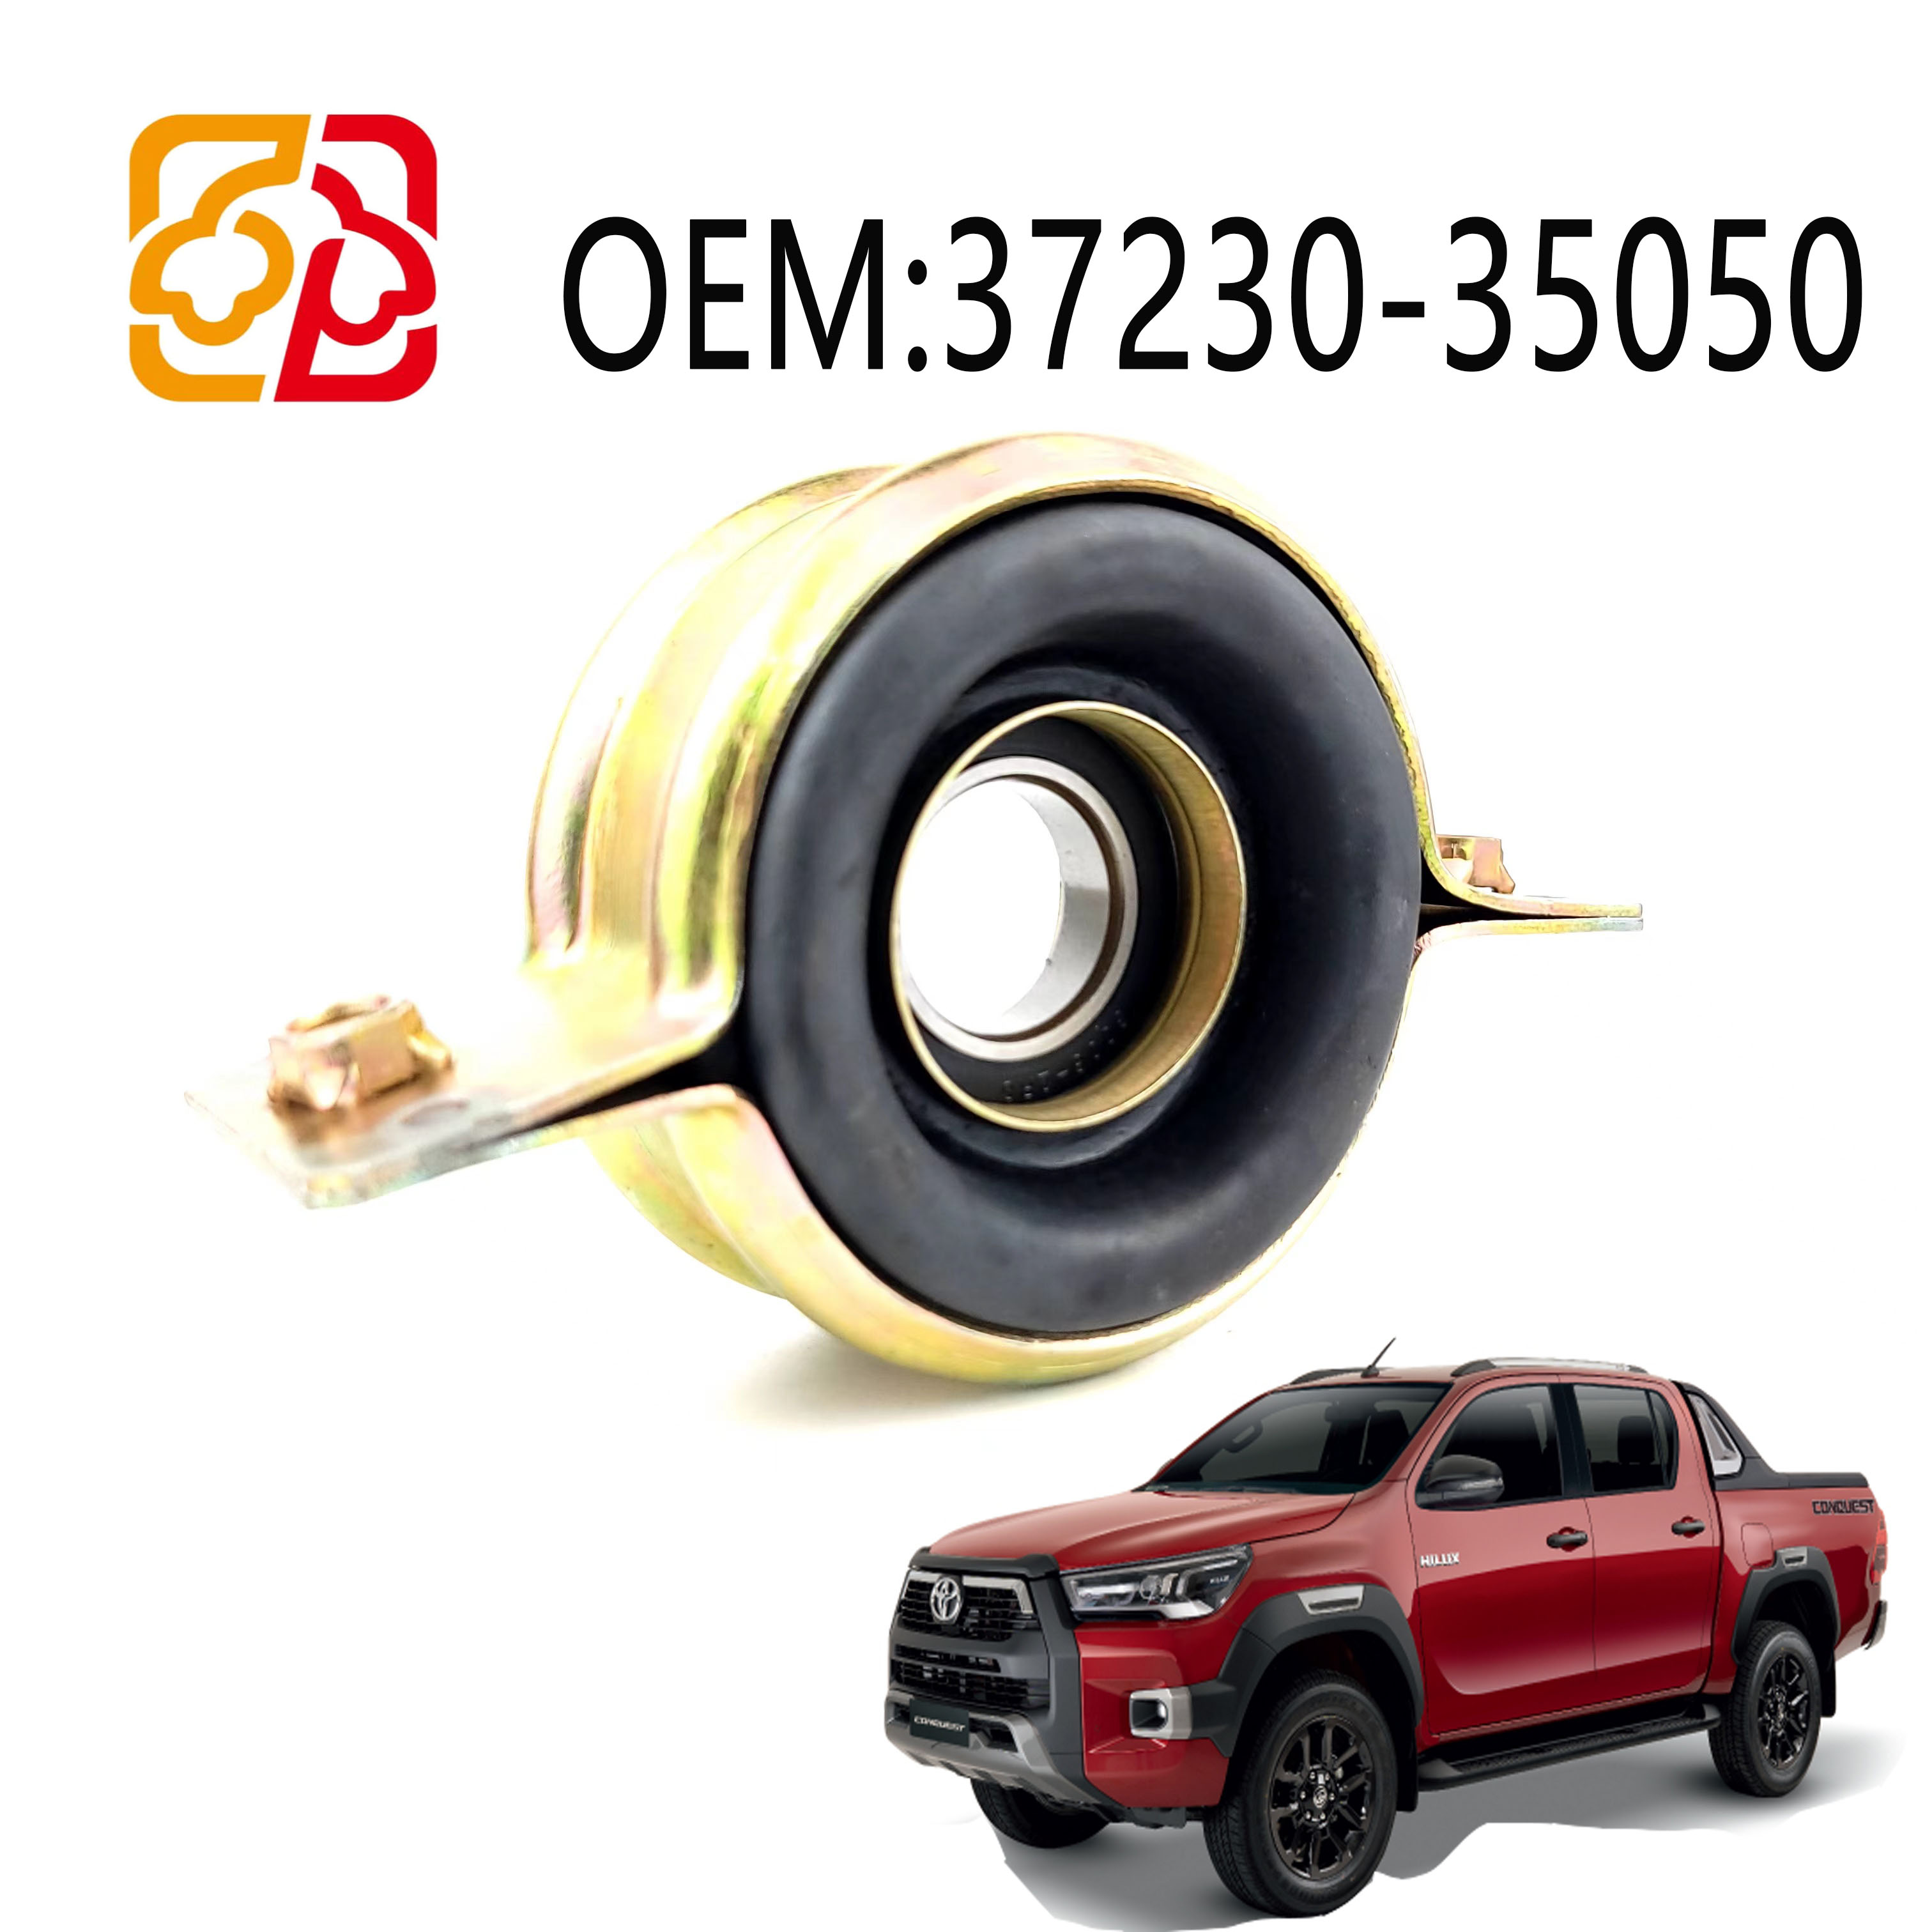 High quality drive shaft center support bearing OEM37230-35050 for Toyota